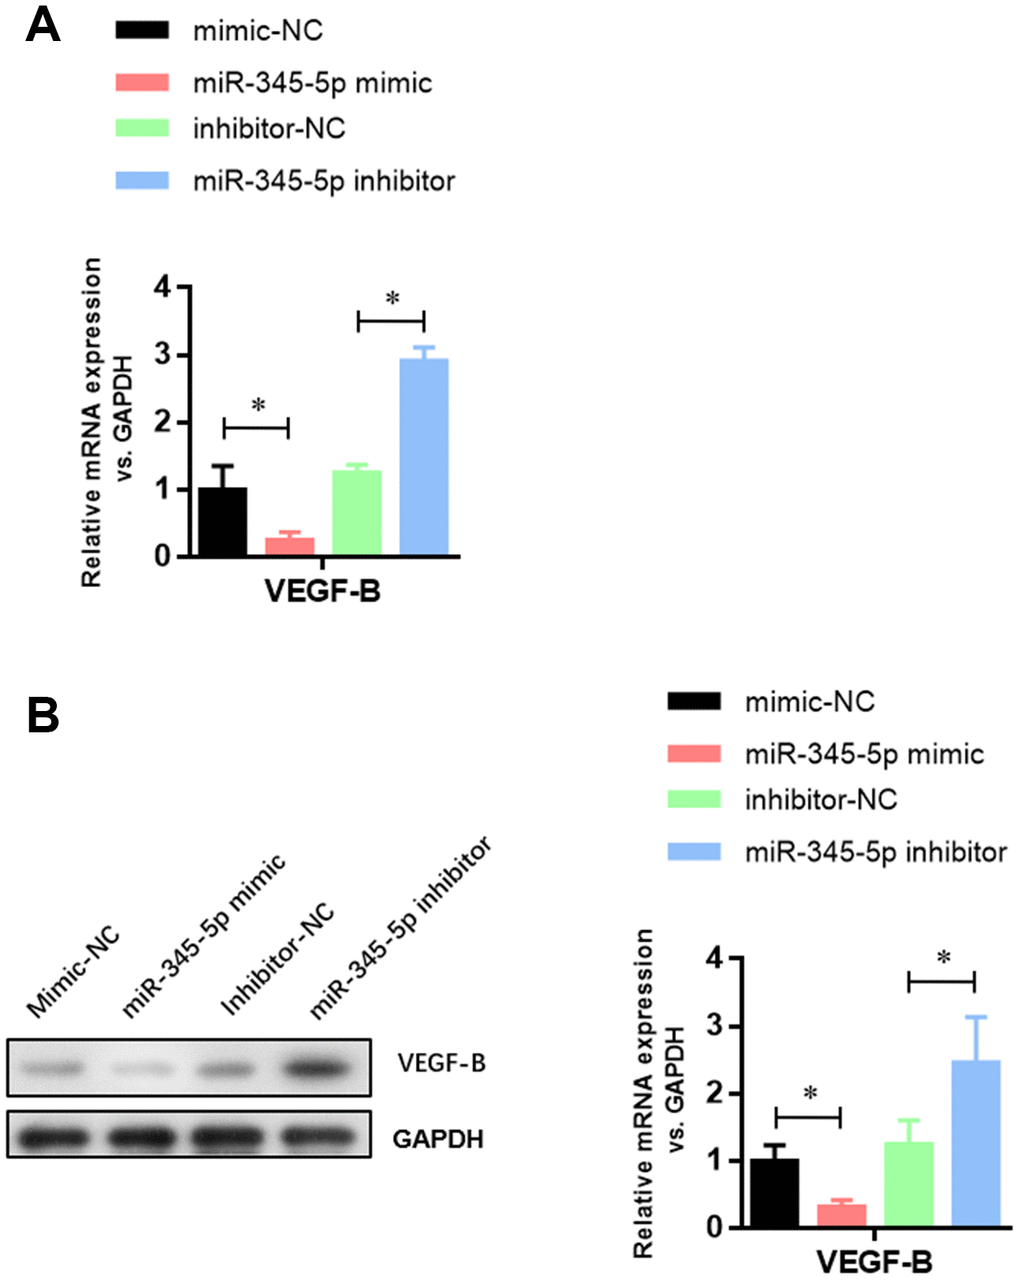 miR-345-5p suppressed the mRNA and protein levels of VEGF-B. (A) Real-time PCR analysis of VEGF-B mRNA in 3T3-L1 cells. (B) Western blot analysis of VEGF-B protein in 3T3-L1 cells. *P